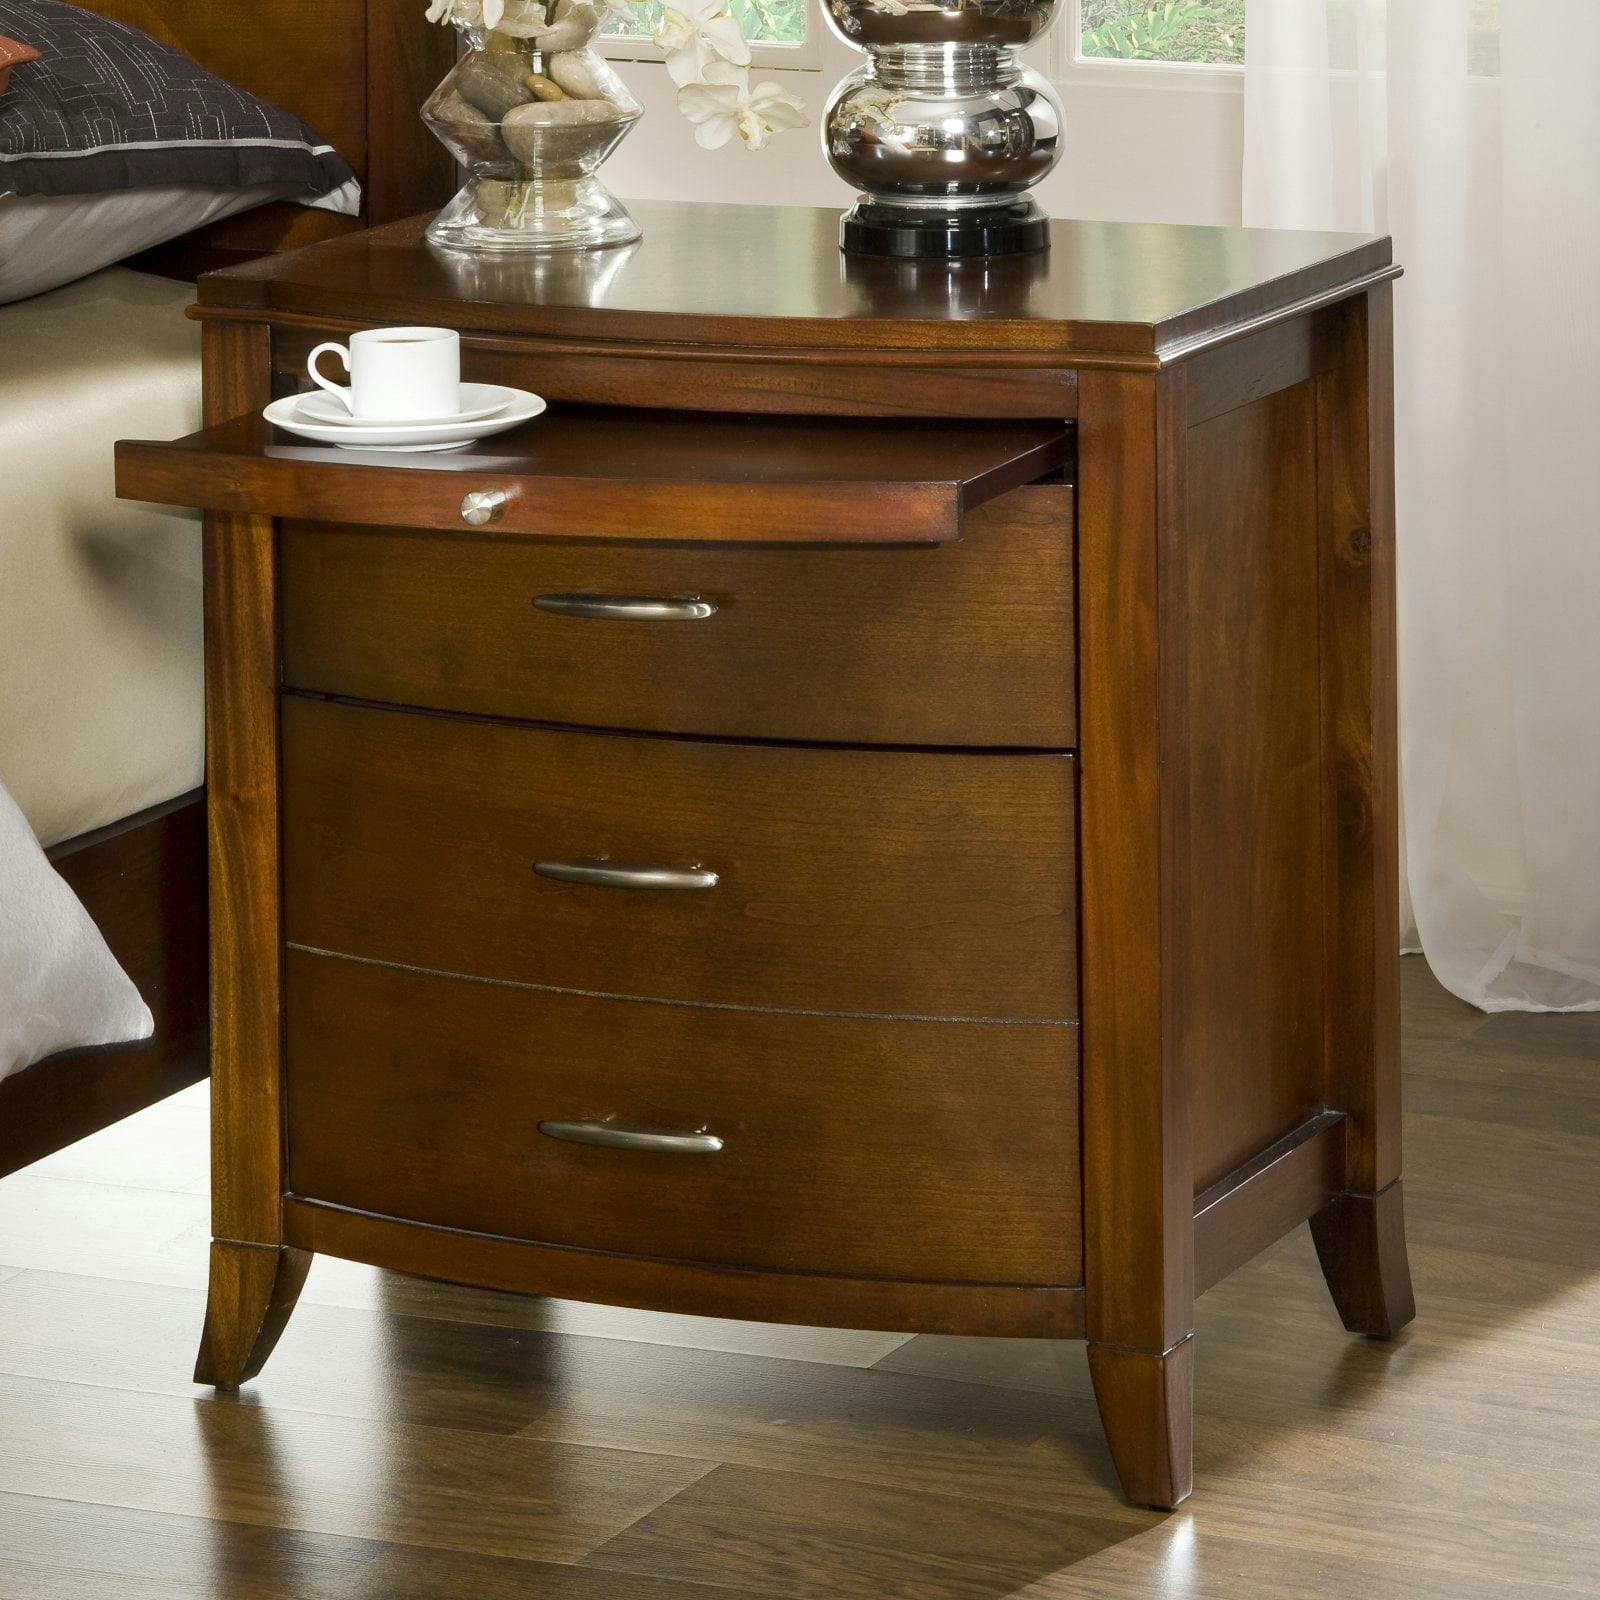 Mahogany and Cherry Wood 2-Drawer Nightstand with Charging Station